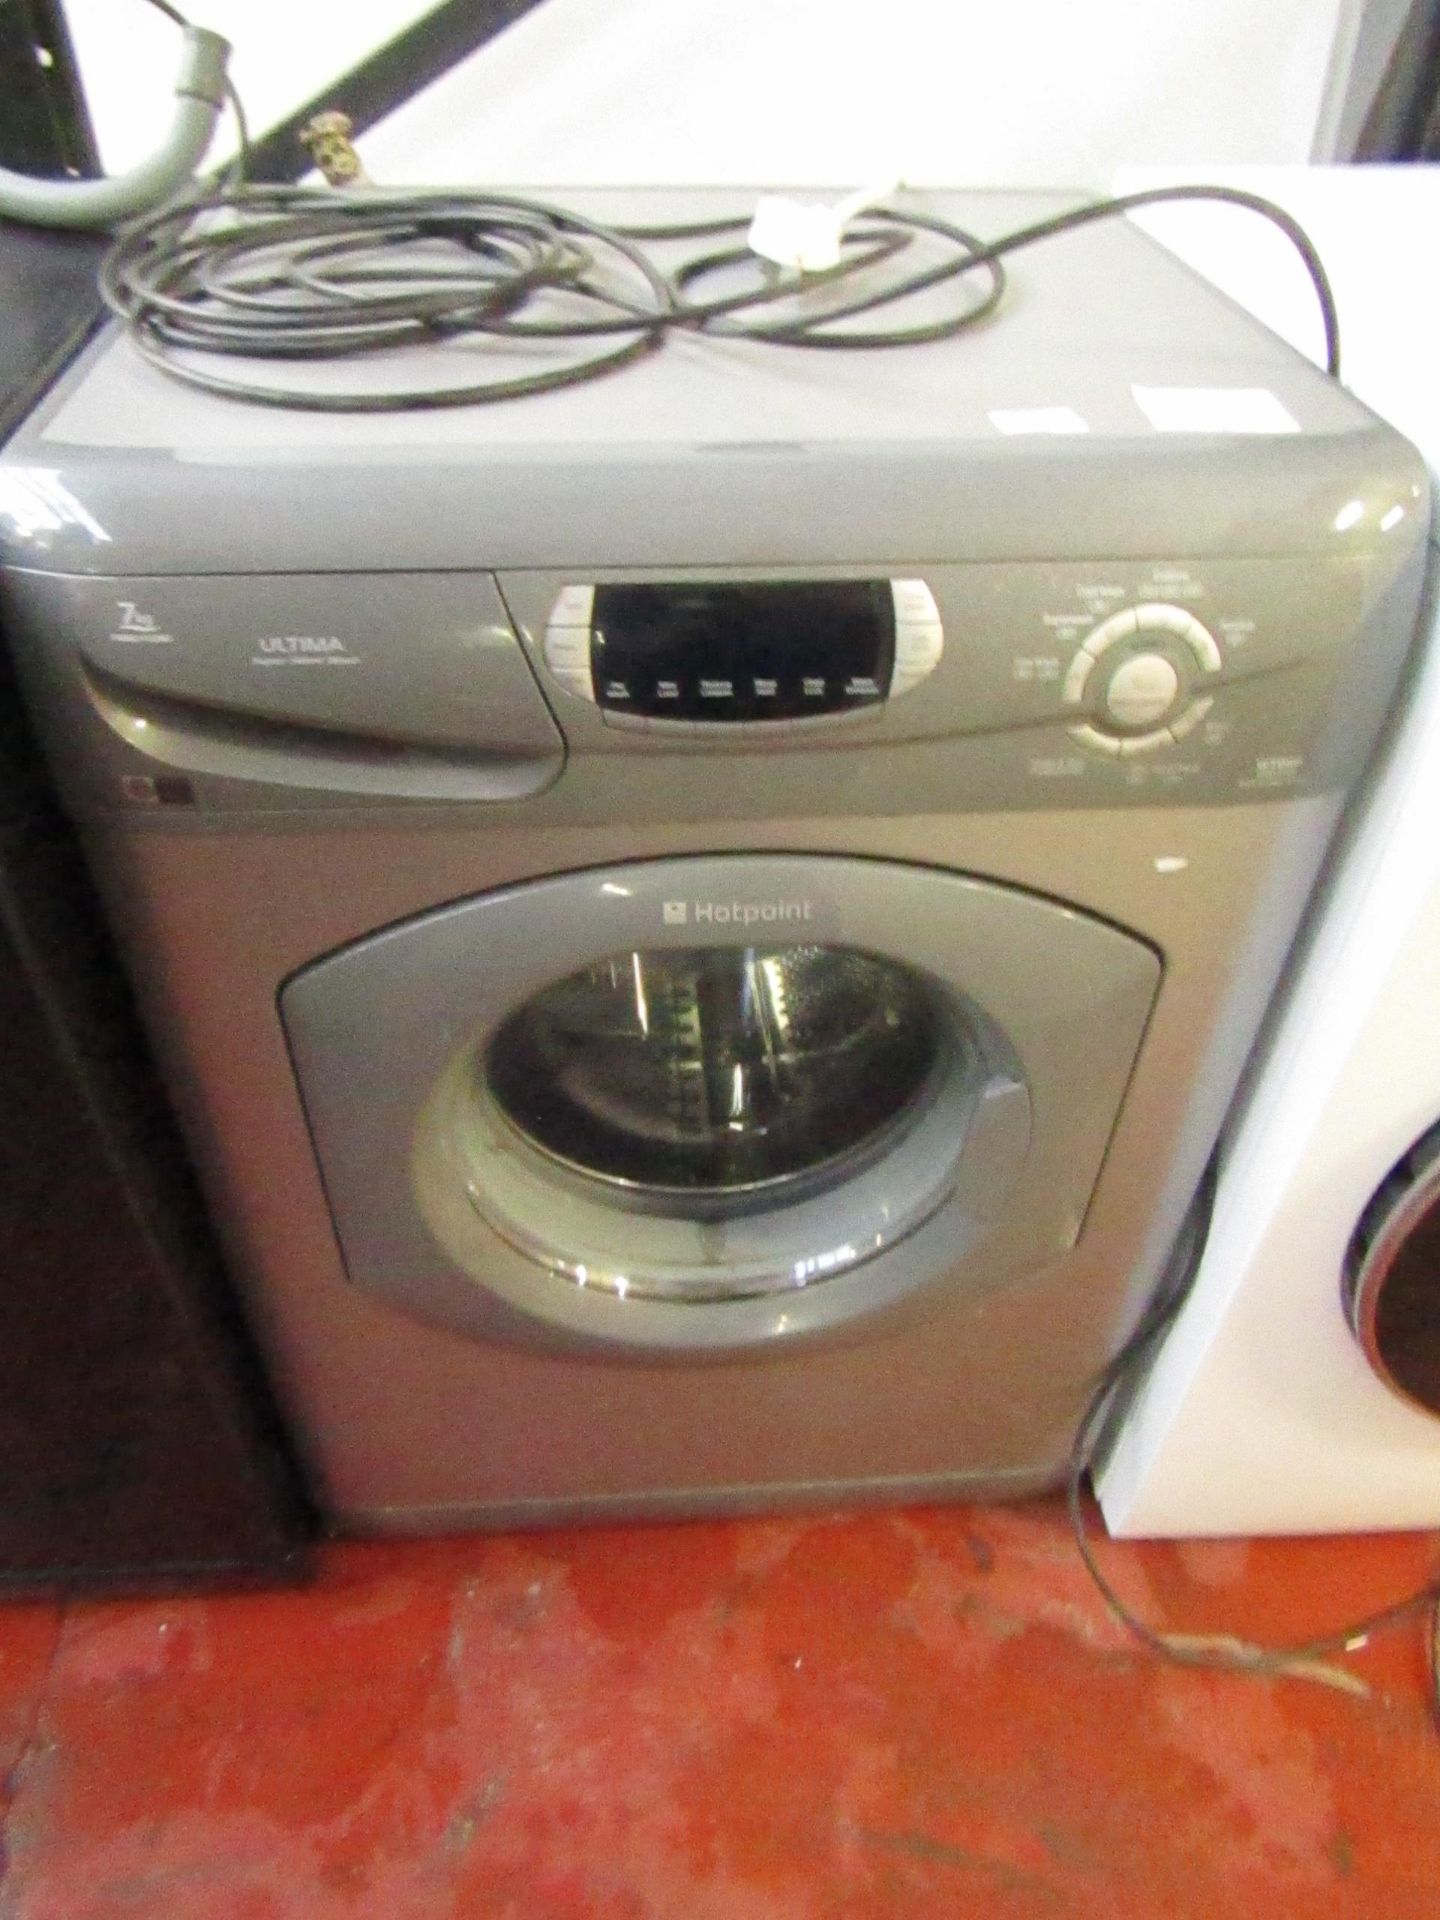 Hotpoint Ultima WT960 washing machine, powers on and spins.